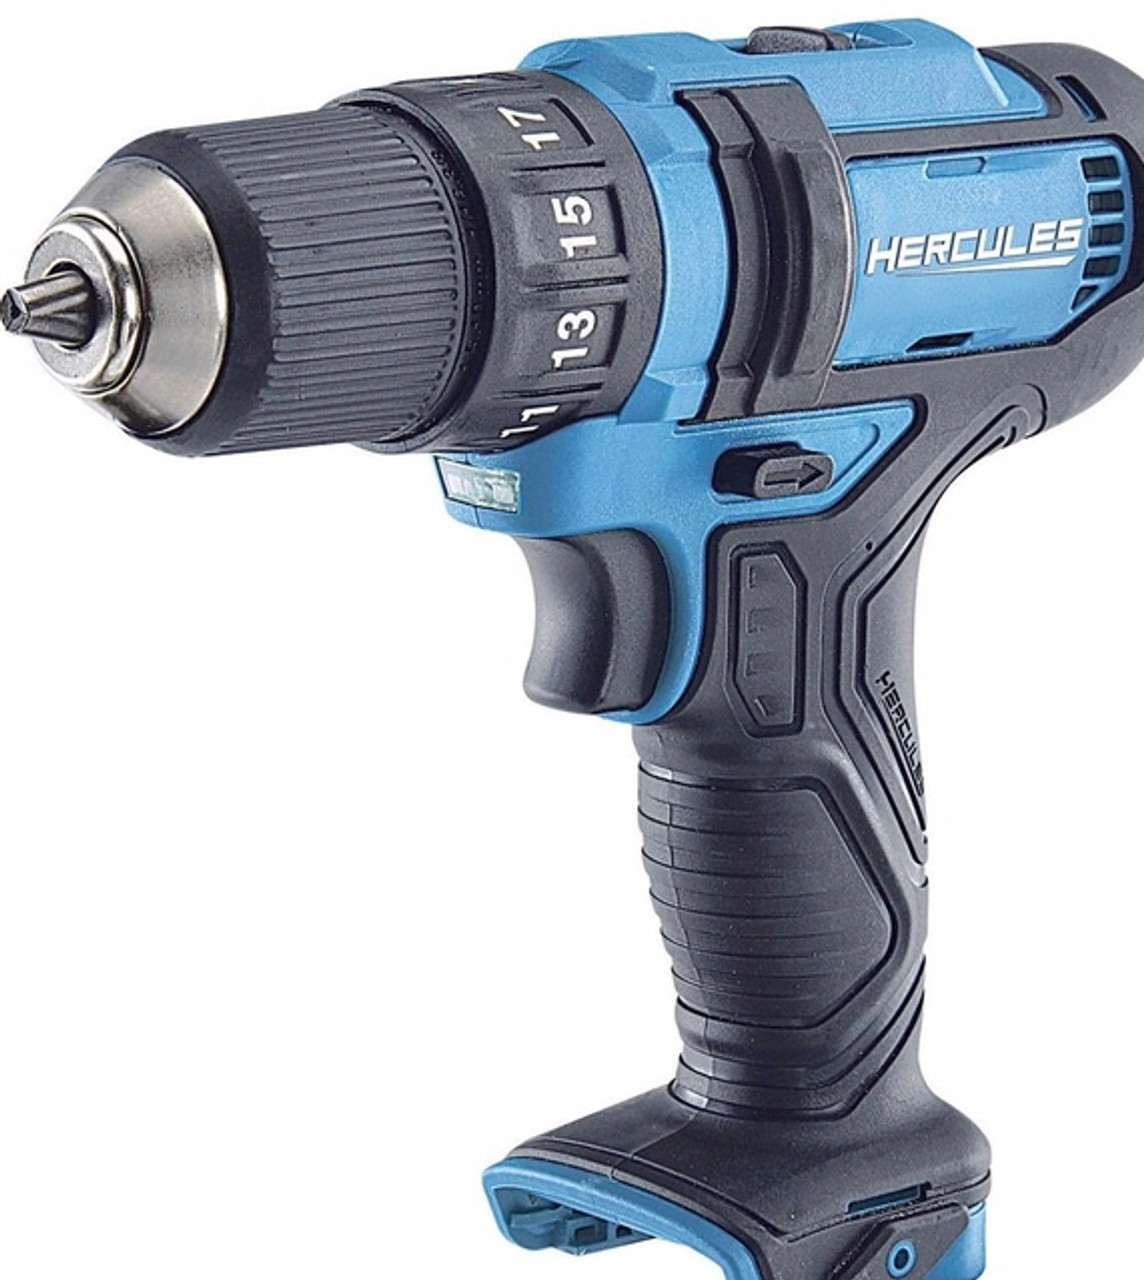 Hercules 12v Lithium-Ion Cordless Compact 3/8 In. Drill/Driver - Tool Only